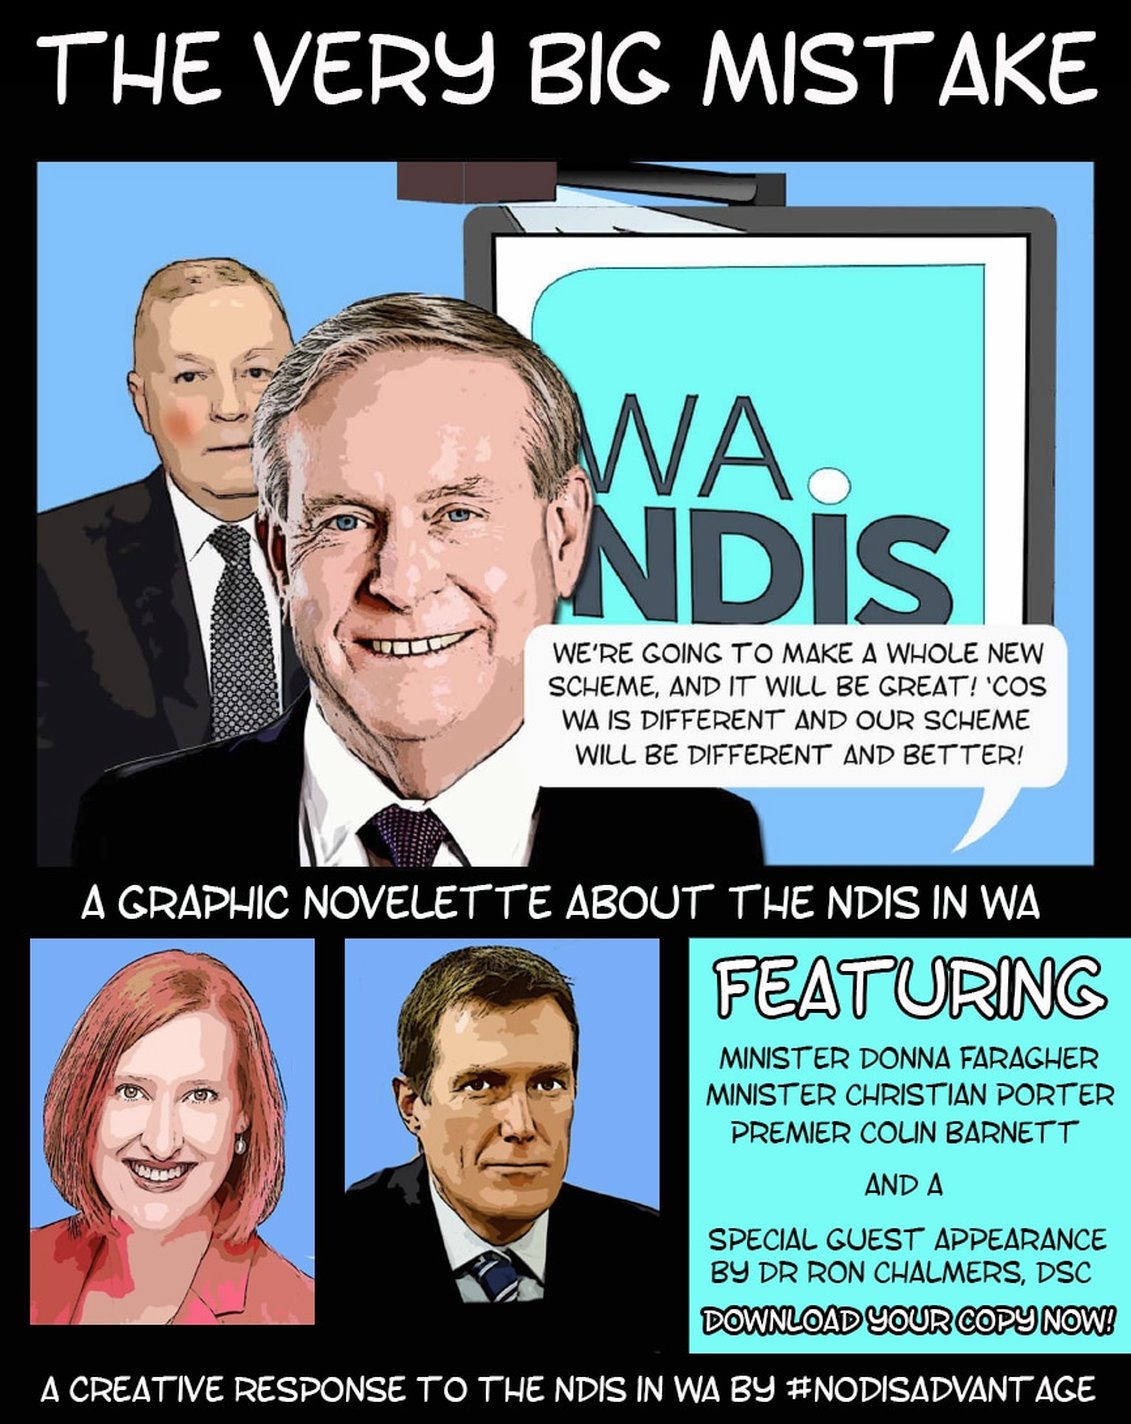 Image description:  A graphic titled 'The Very Big Mistake'.  A cartoon of Premier Colin Barnett's head and shoulders in front of a cartoon of Dr Ron Chalmers of the Disability Services Commission - Ron is standing beside a whiteboard that reads, 'WA NDIS'.  A speech balloon from Colin says, 'We're going to make a whole new scheme, and it will be great!  'Cos WA is different and our scheme will be different and better!'  A subtitle reads 'A graphic novelette about the NDIS in WA.  Two images are below it - cartoon portraits of Minister Christian Porter and Minister Donna Faragher.  The text beside it reads, 'Featuring Minister Donna Faragher, Minister Christian Porter and a special guest appearance by Dr Ron Chalmers, DSC.  Download your copy now!'  A line at the bottom of the graphic reads, 'A creative response to the NDIS by #nodisadvantage'. 